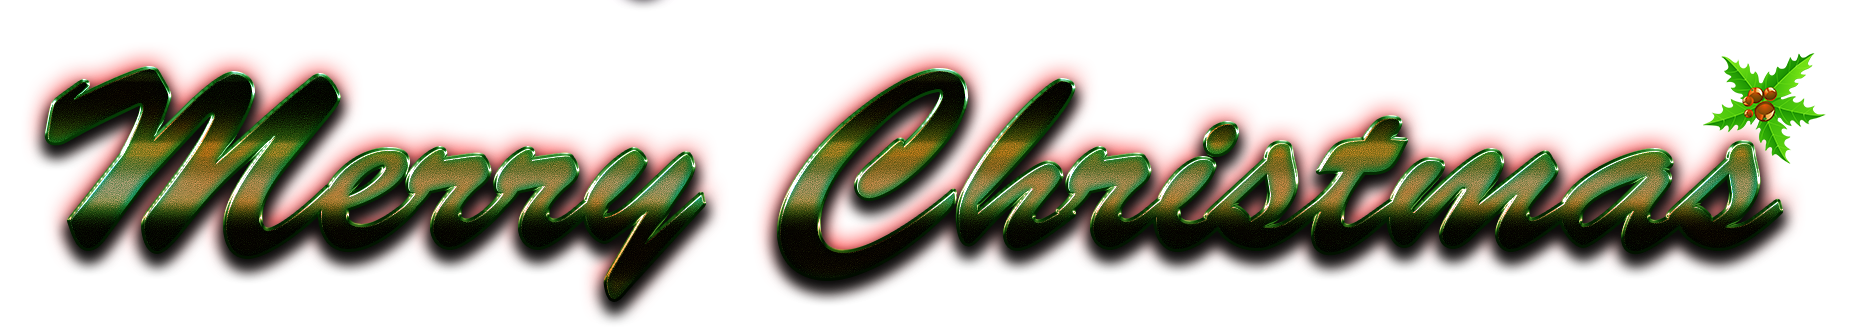 Merry Christmas Letter Transparent Image